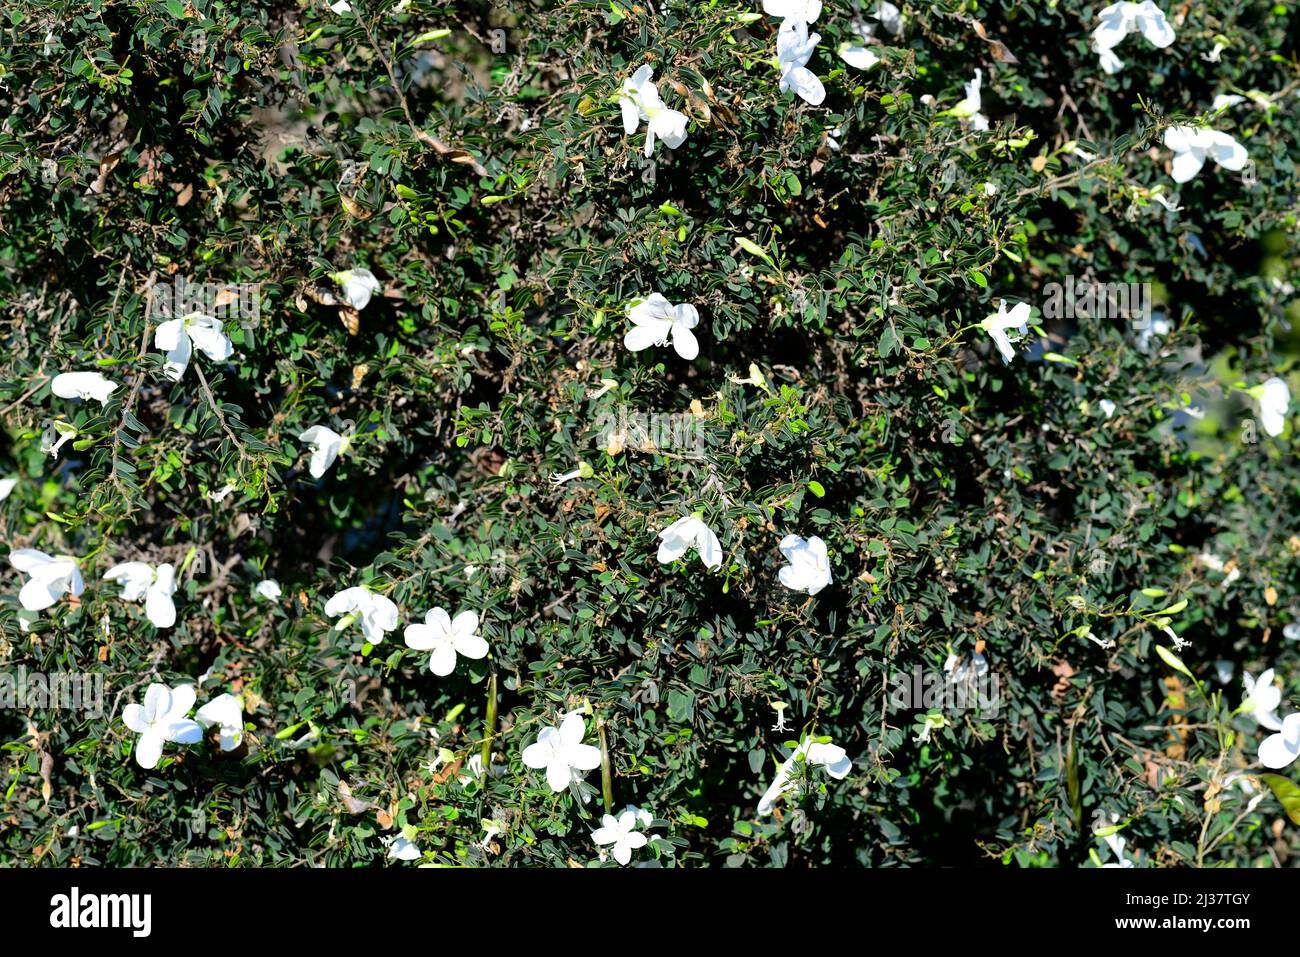 Natal bahuinia (Bahuinia natalensis) is an evergreen shrub native to South Africa. Blooming specimen. Stock Photo